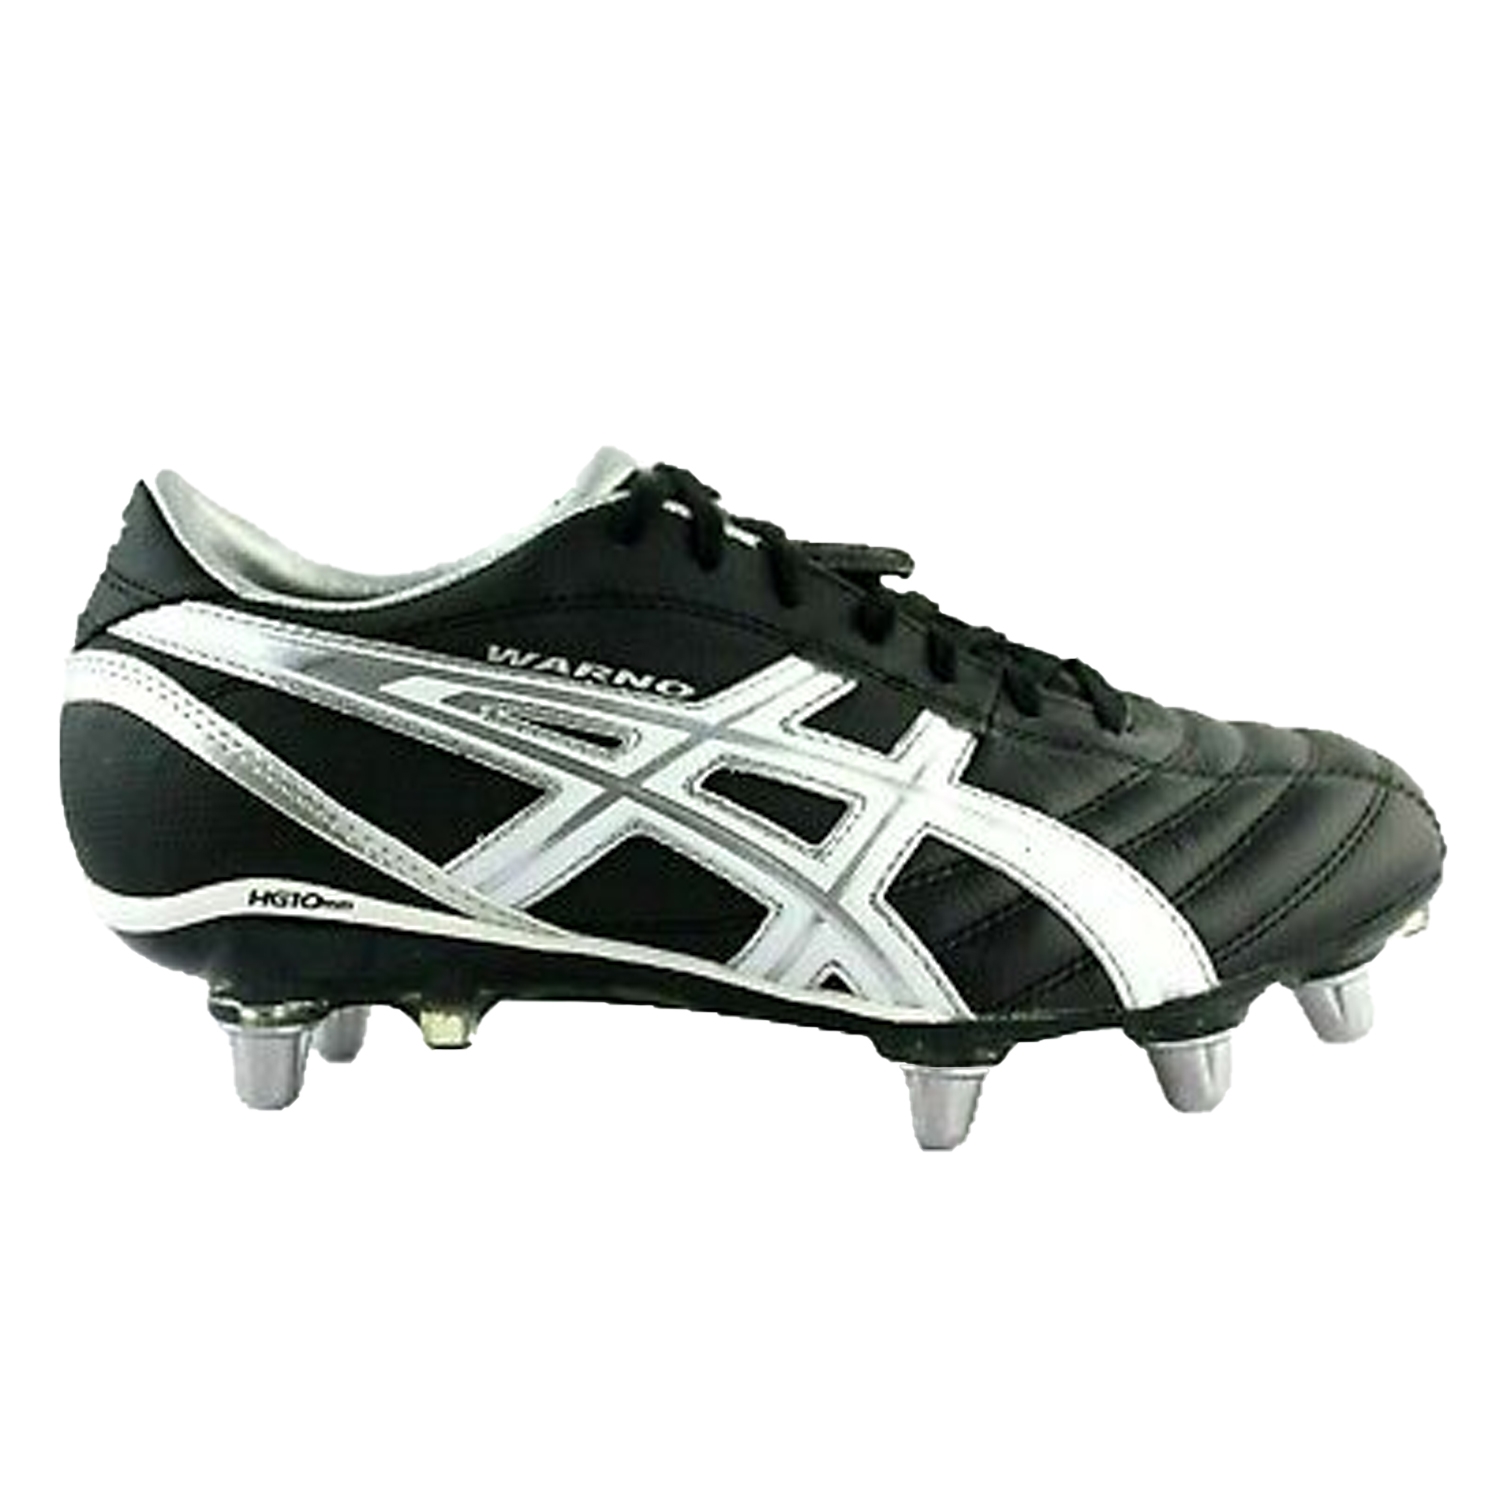 Asics SNR Lethal Warno ST2 Football Boots: Black/White/Silver | Mike ...